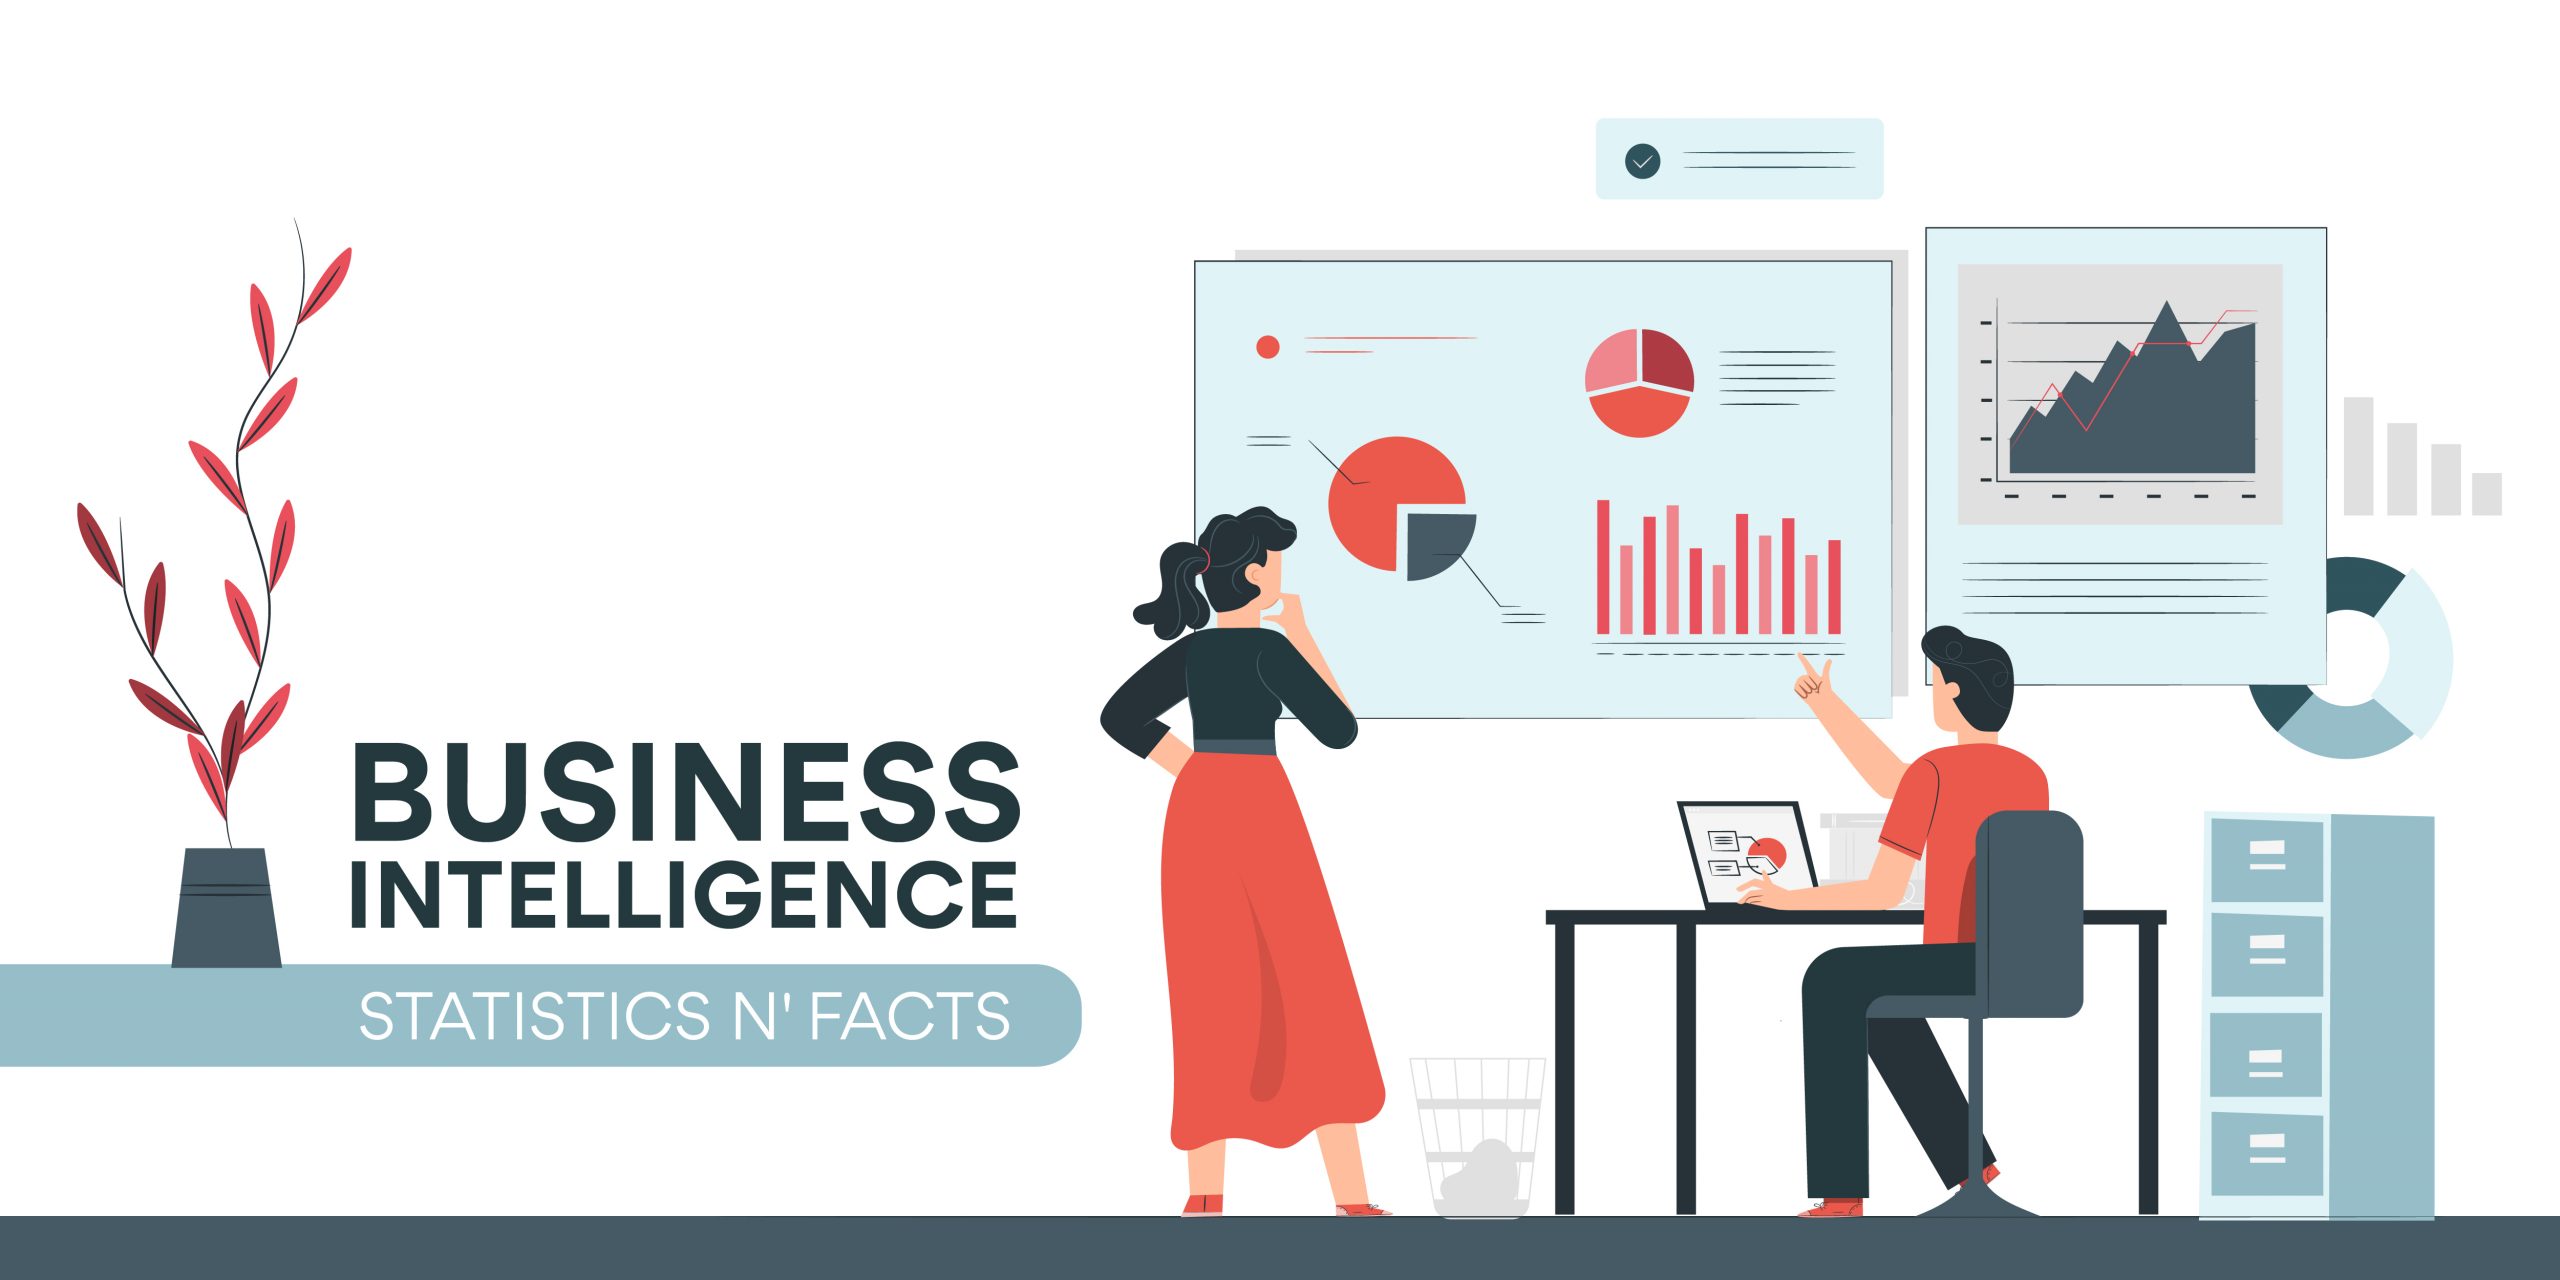 Business Intelligence Statistics – By Intelligence Industry, Vendors, Concerns, Importance, Sectors using BI